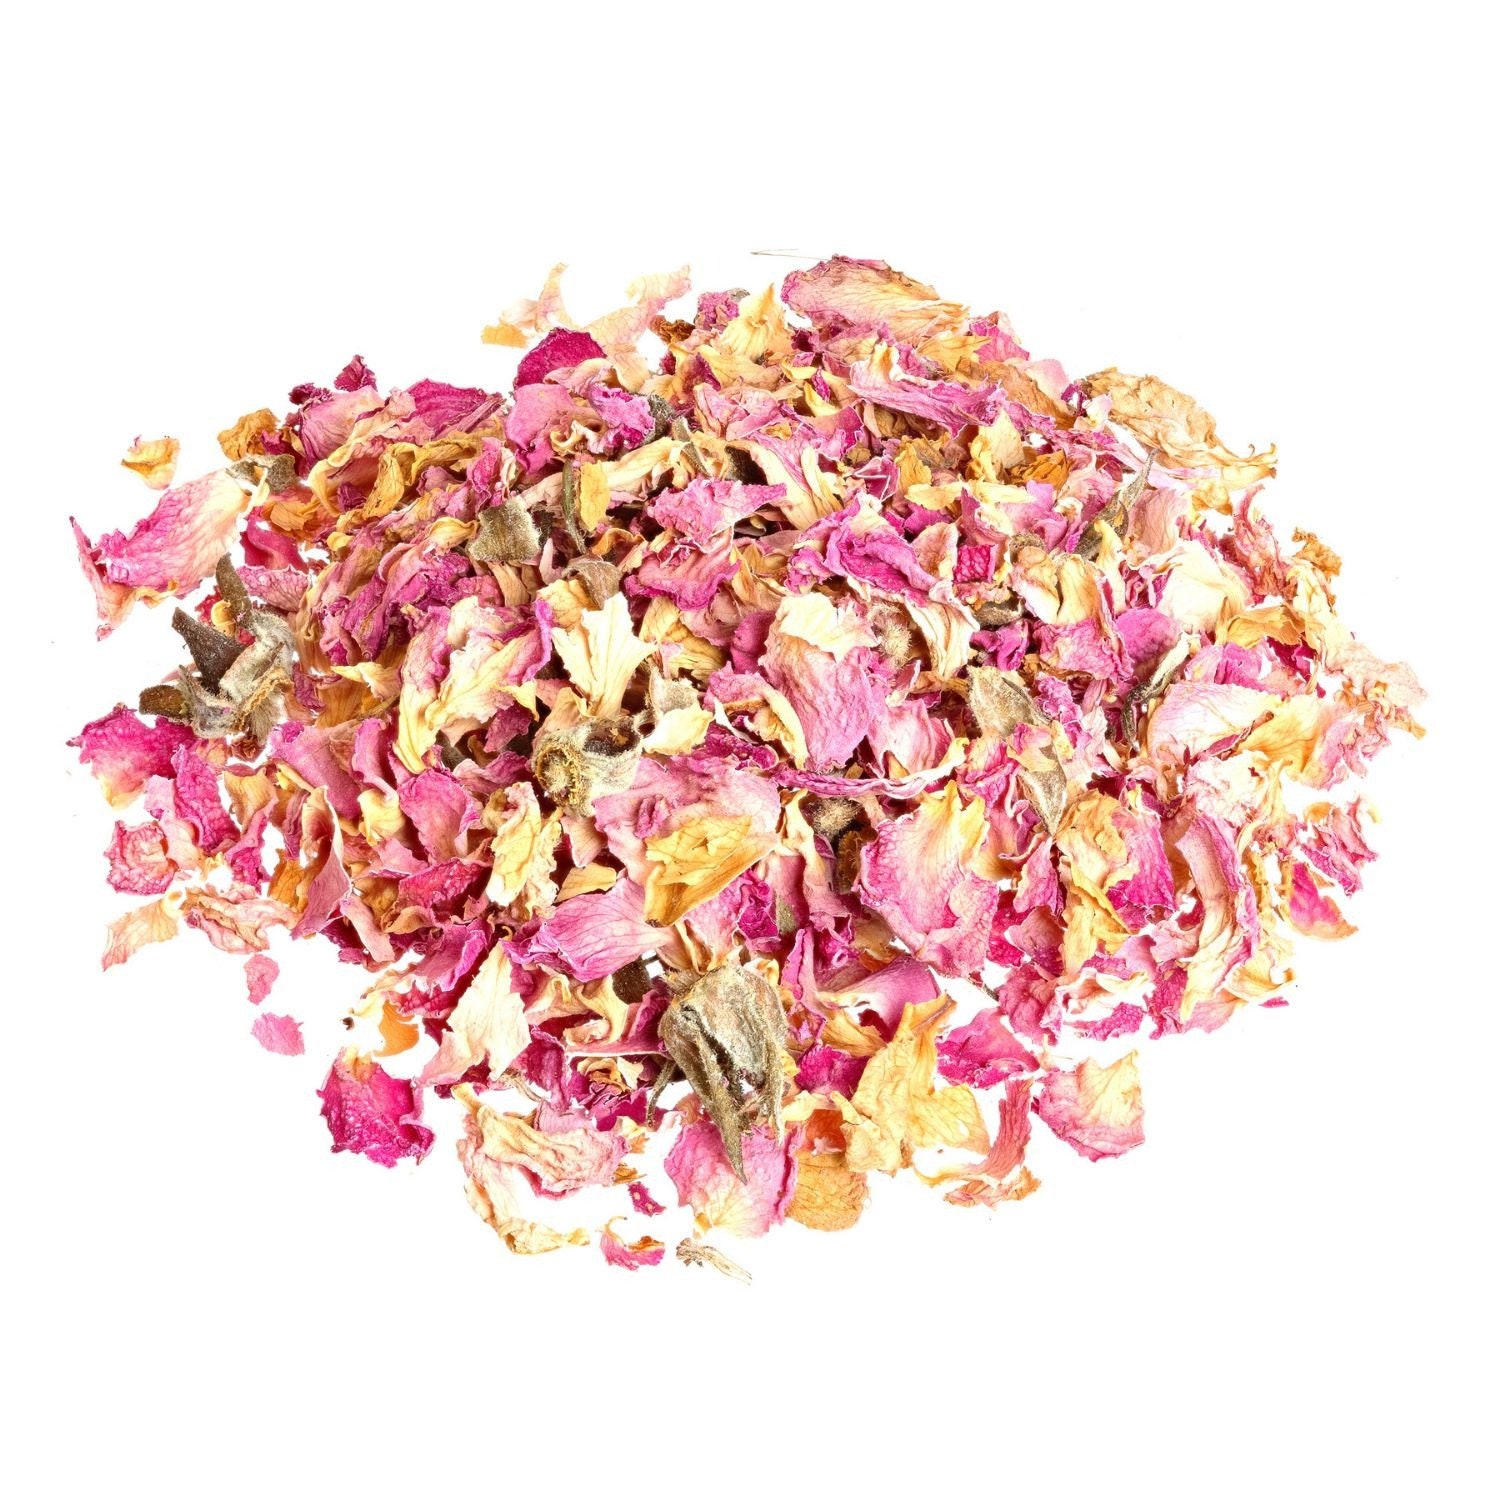 Gorgeous dried edible rose petals back - Laeeque Bakeware